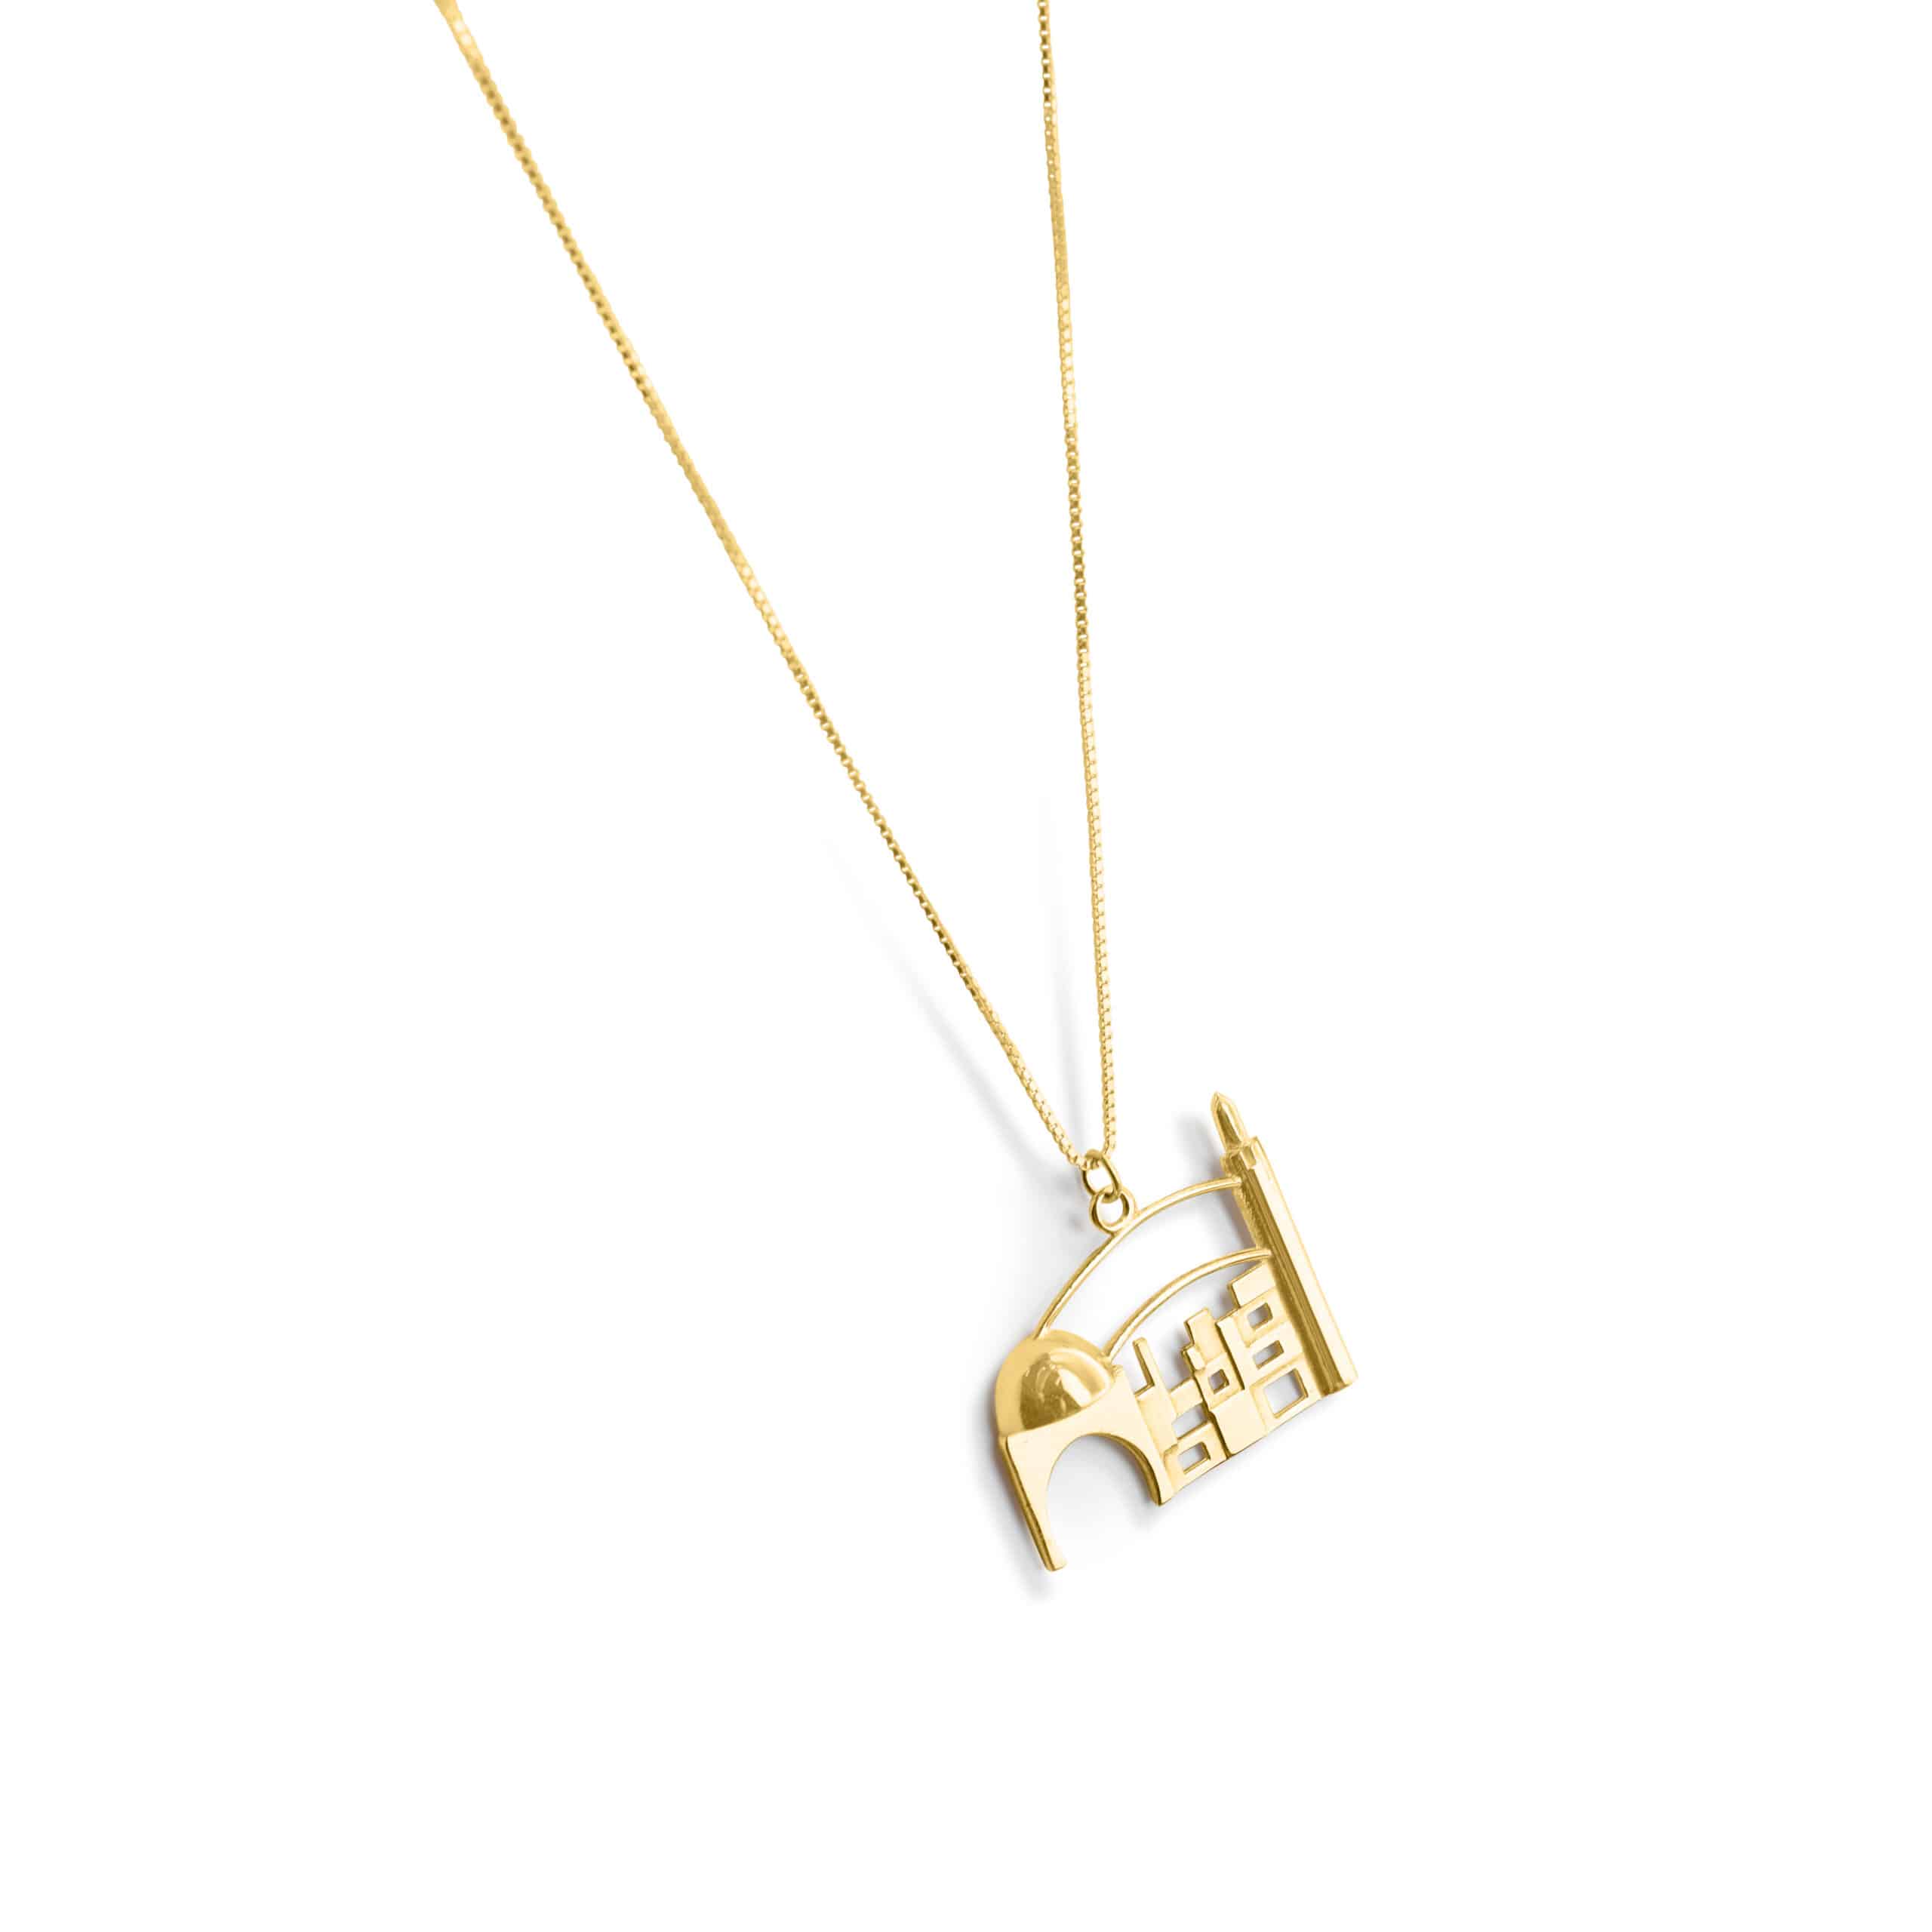 Personalized Jerusalem Necklace made of 14K Yelllow Gold